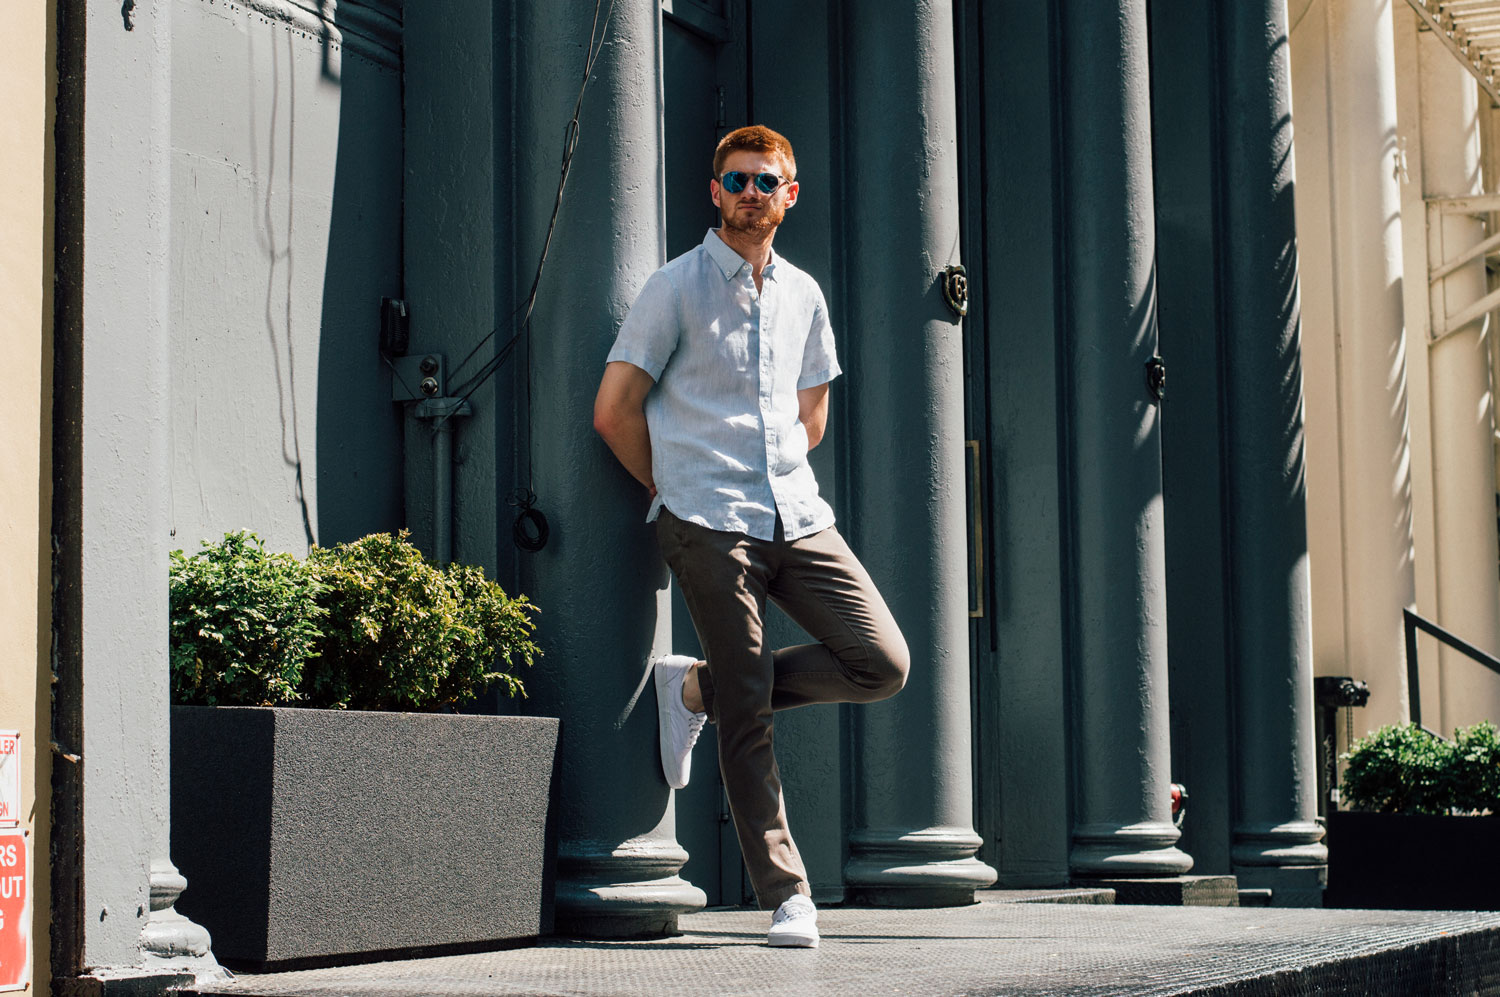 heatwave editorial short sleeve button down shirt and chino pants by ons clothing